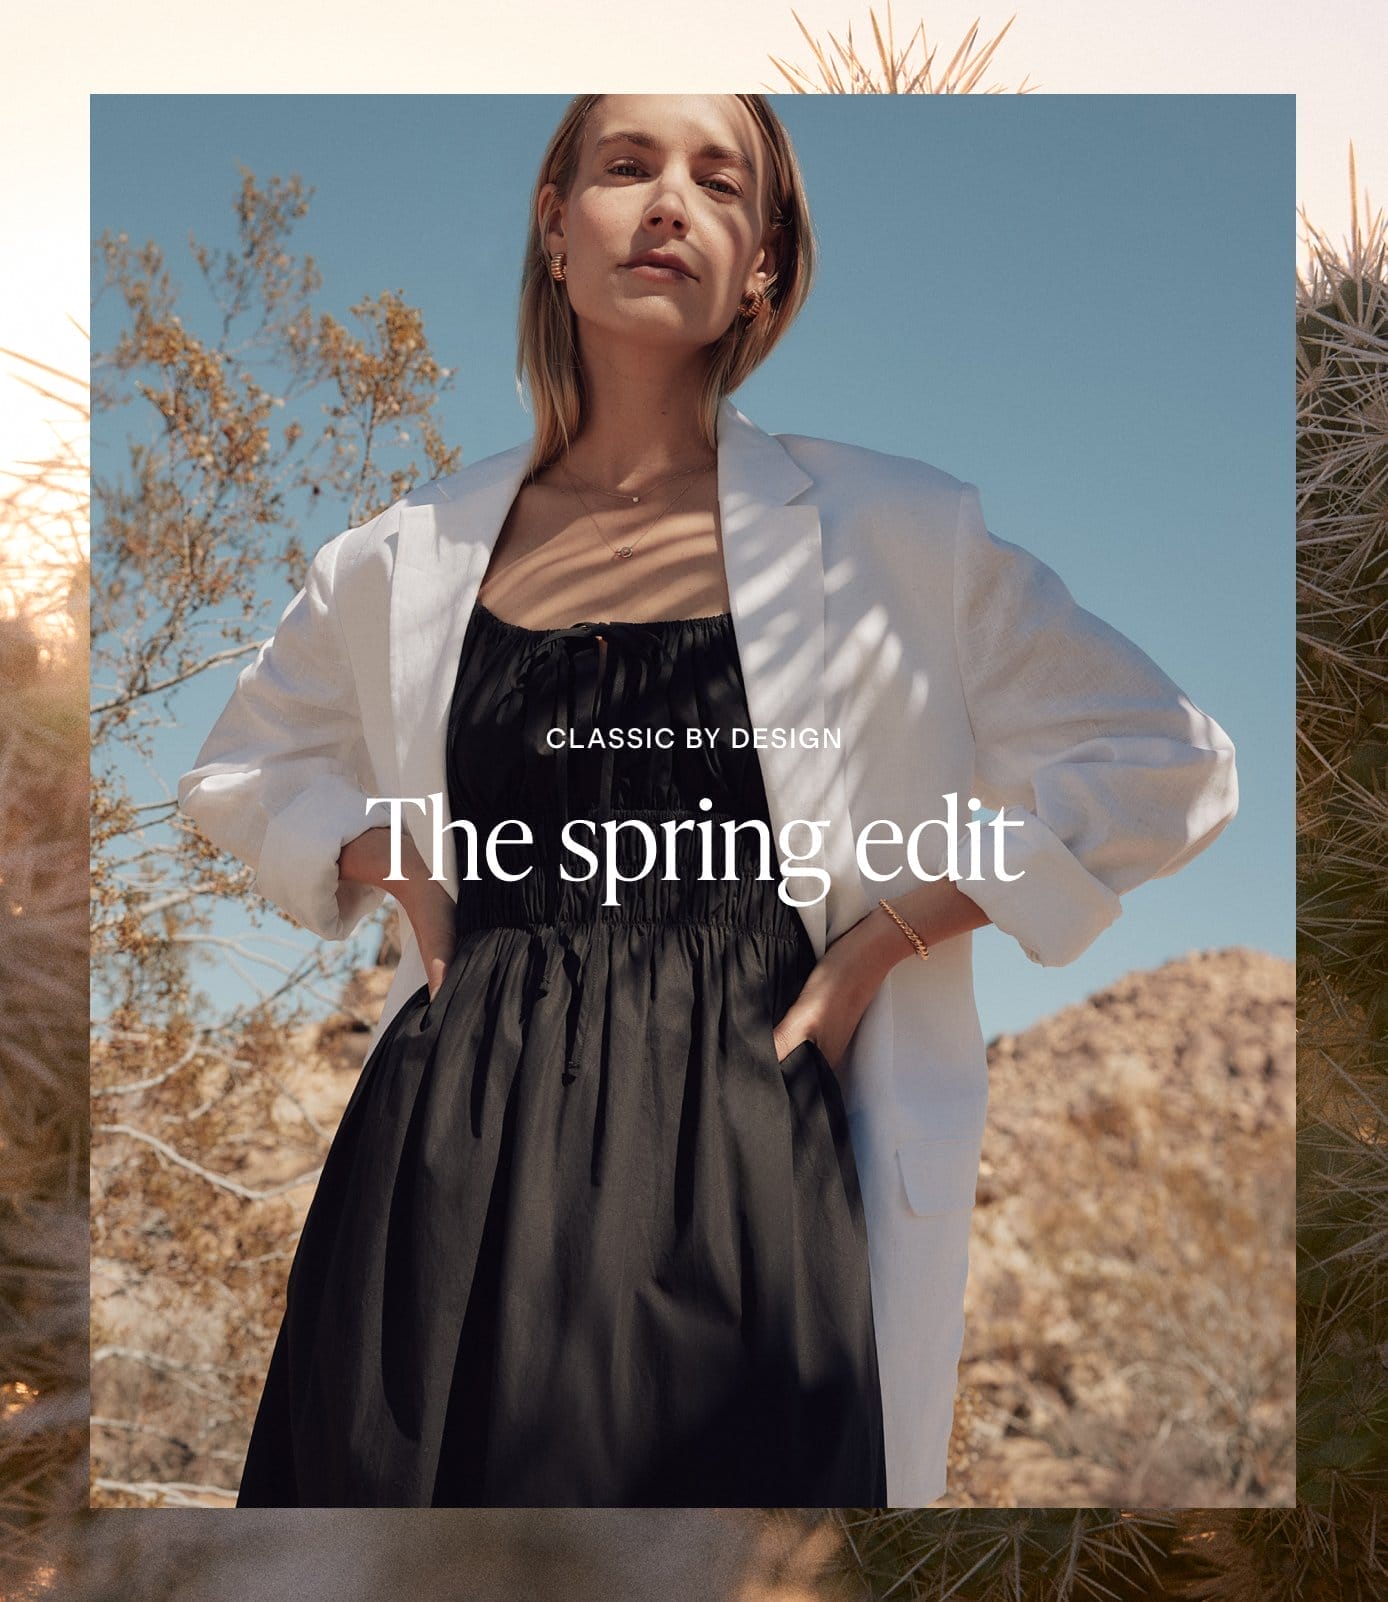 CLASSIC BY DESIGN. The spring edit